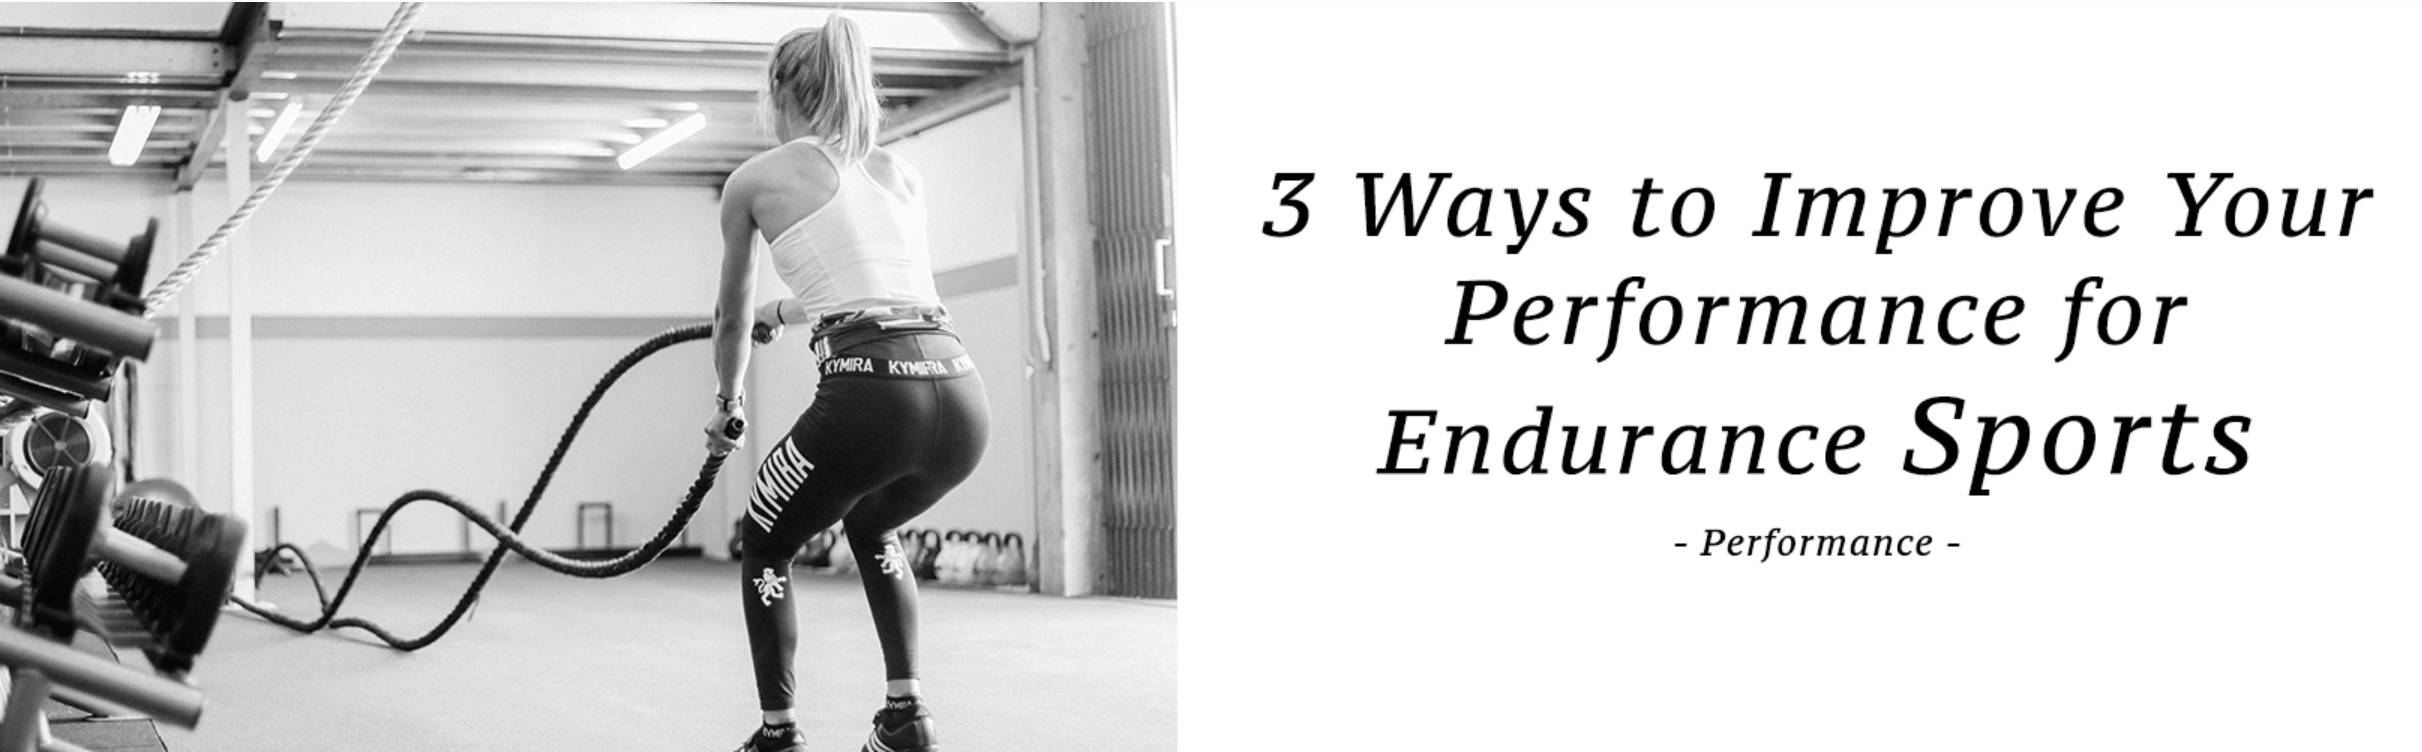 3 Ways to Improve Your Performance for Endurance Sports – KYMIRA